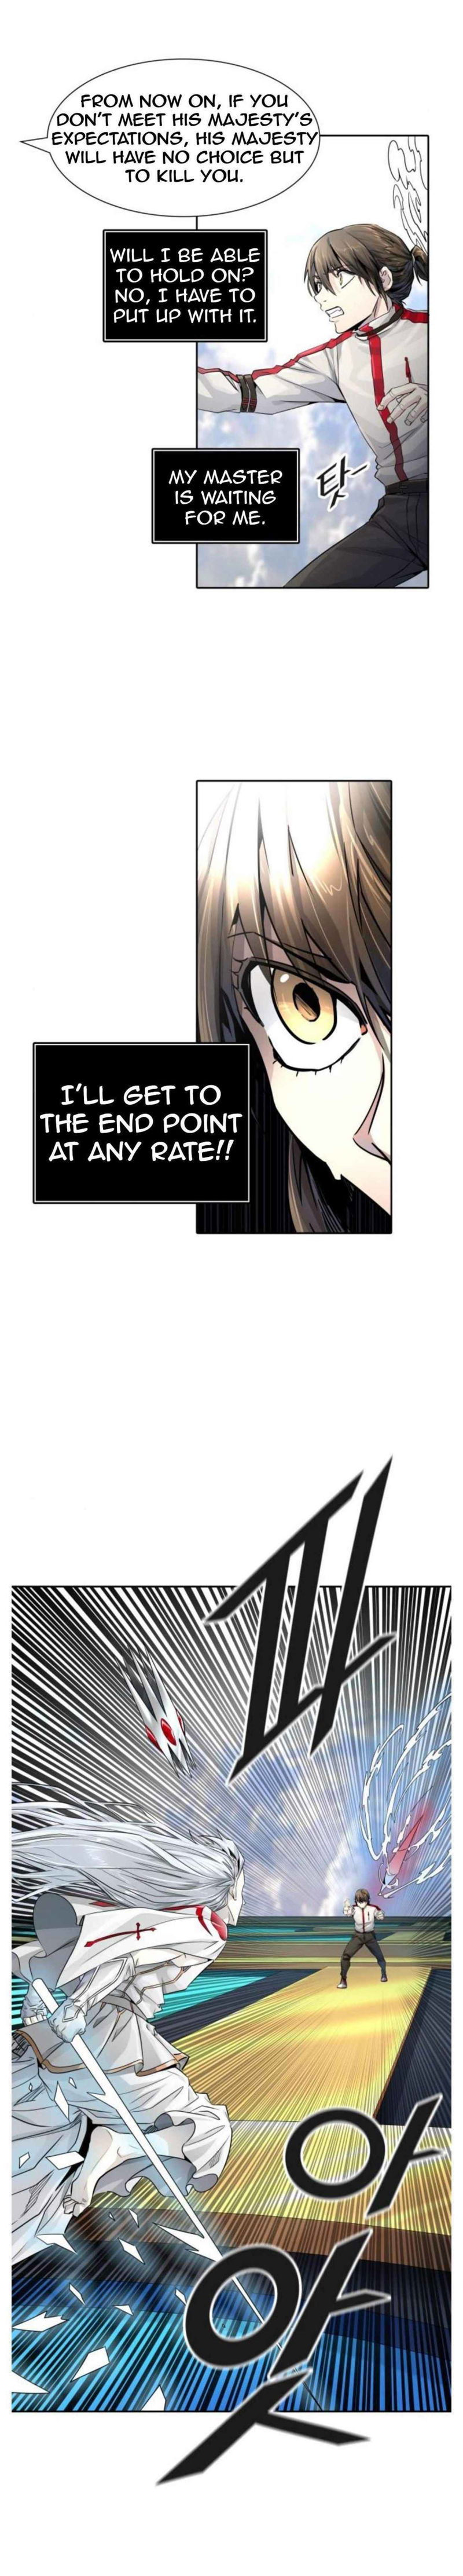 Tower of God Chapter 496 page 20